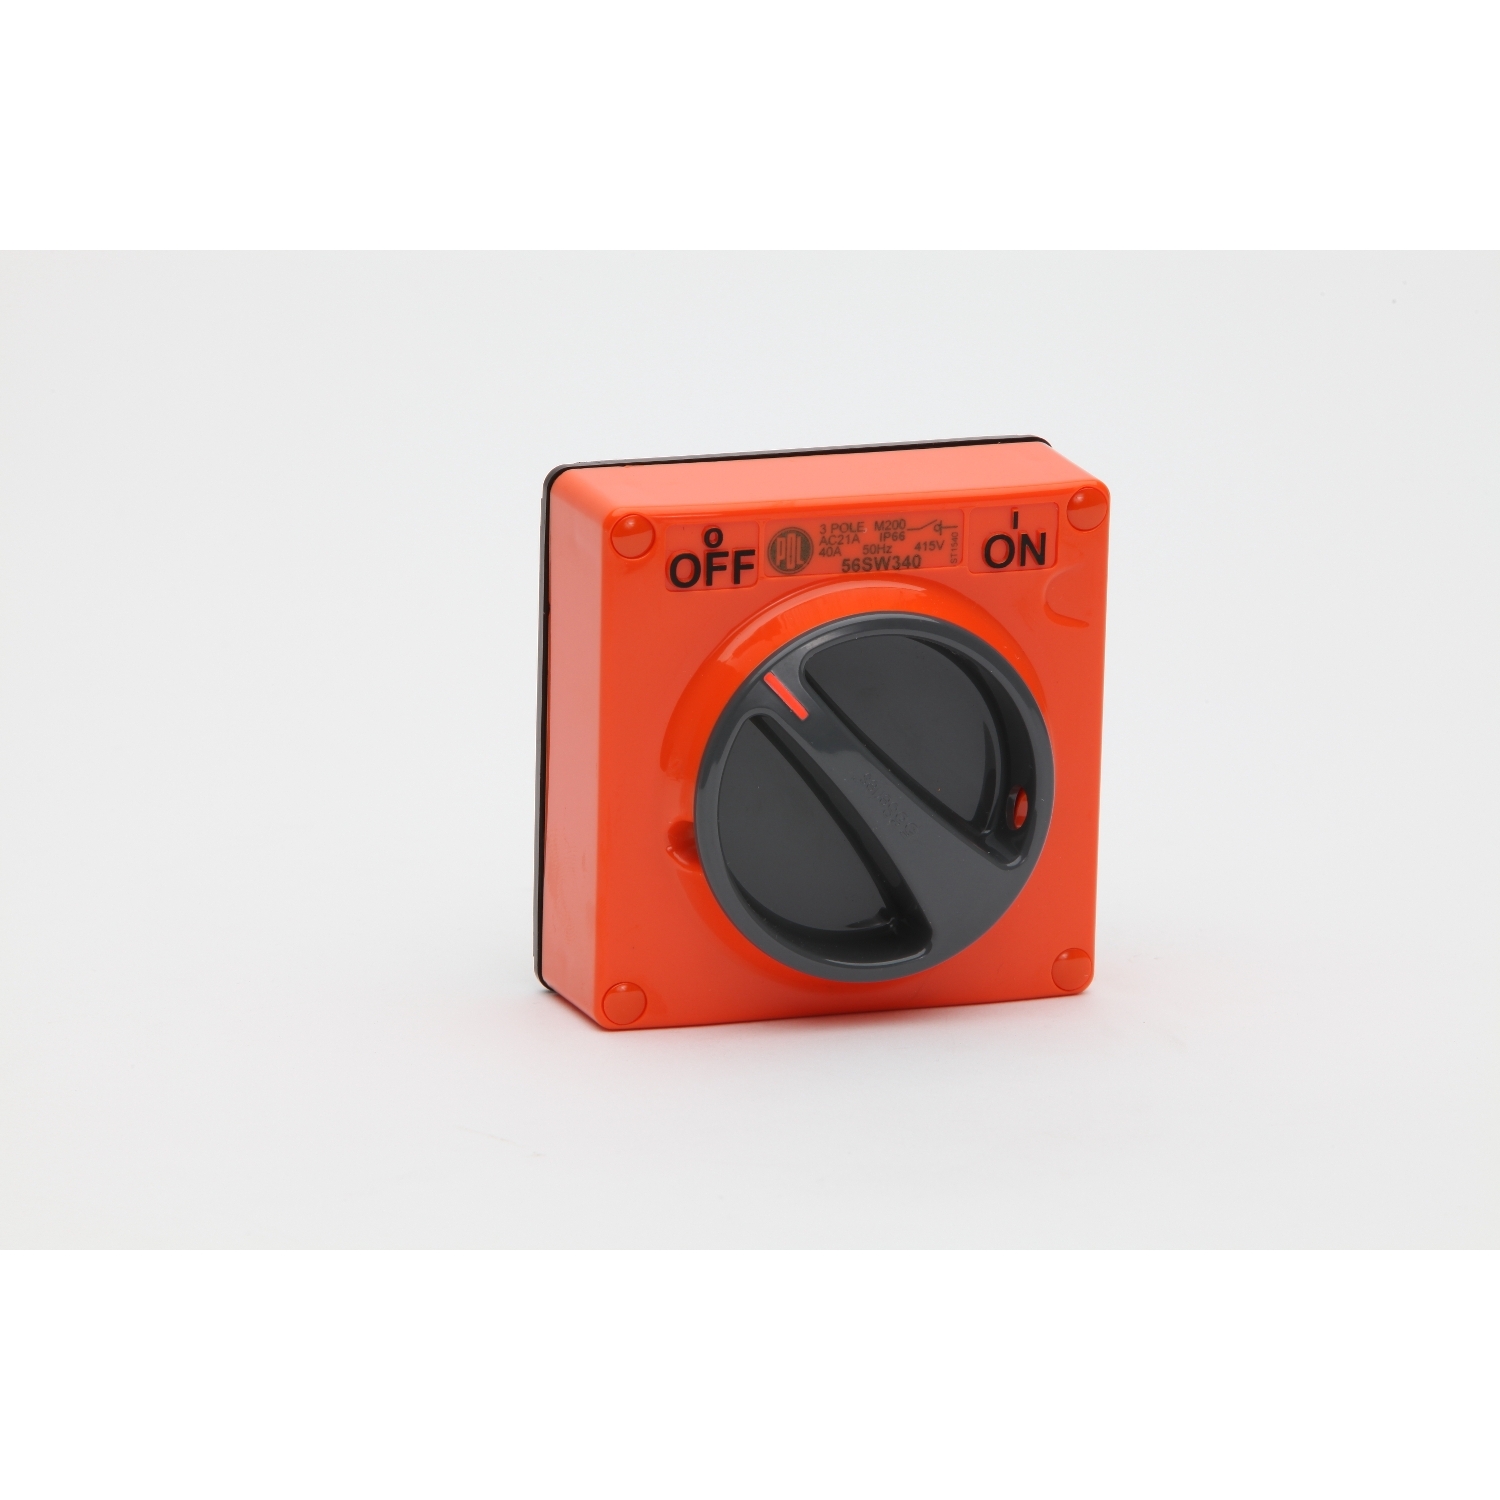 PDL 56 Series - Switch 40A 500V 3-Pole IP66 - Chemical-Resistant Orange